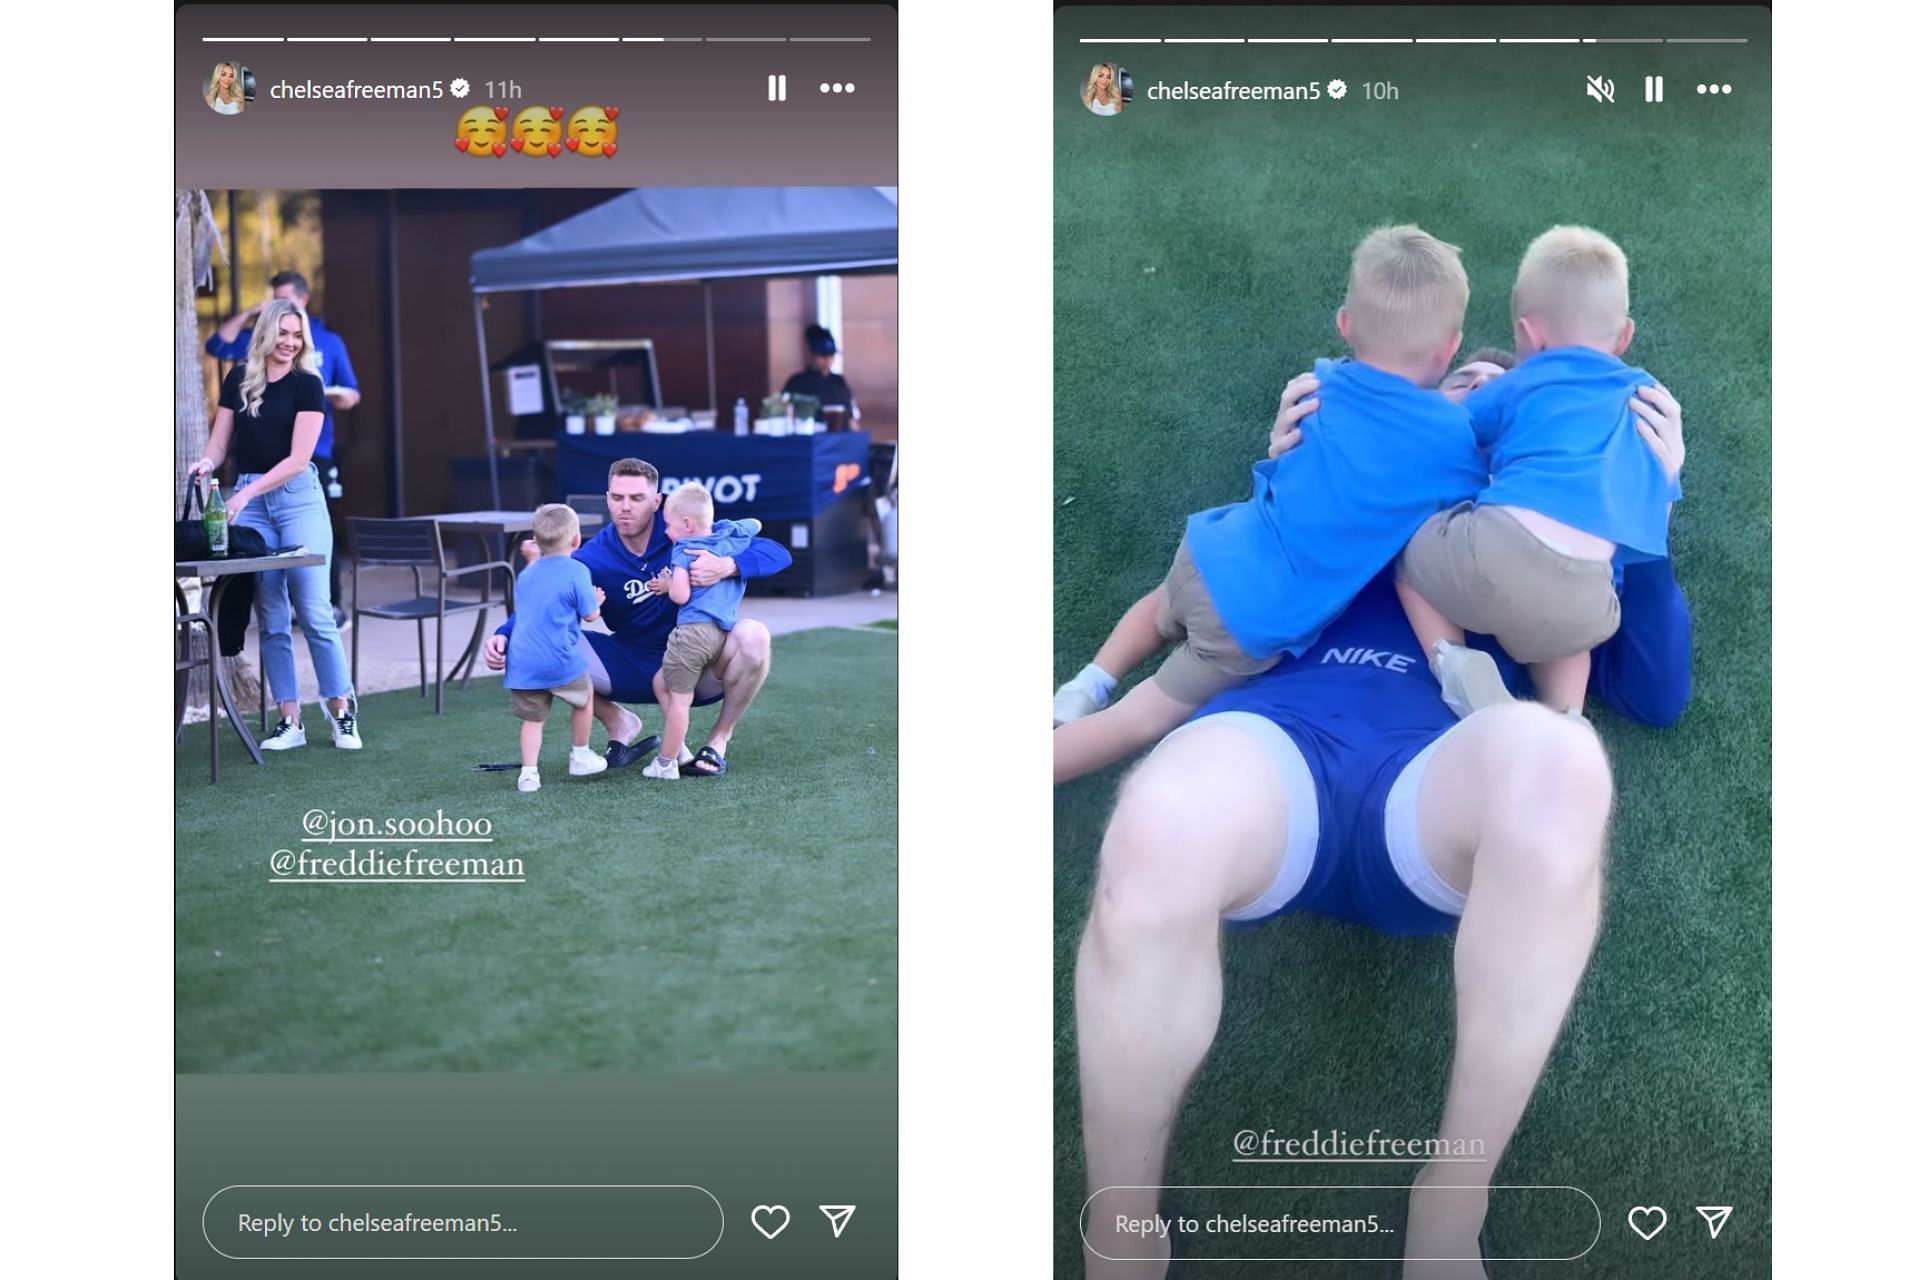 Freddie Freeman spending quality time with his family